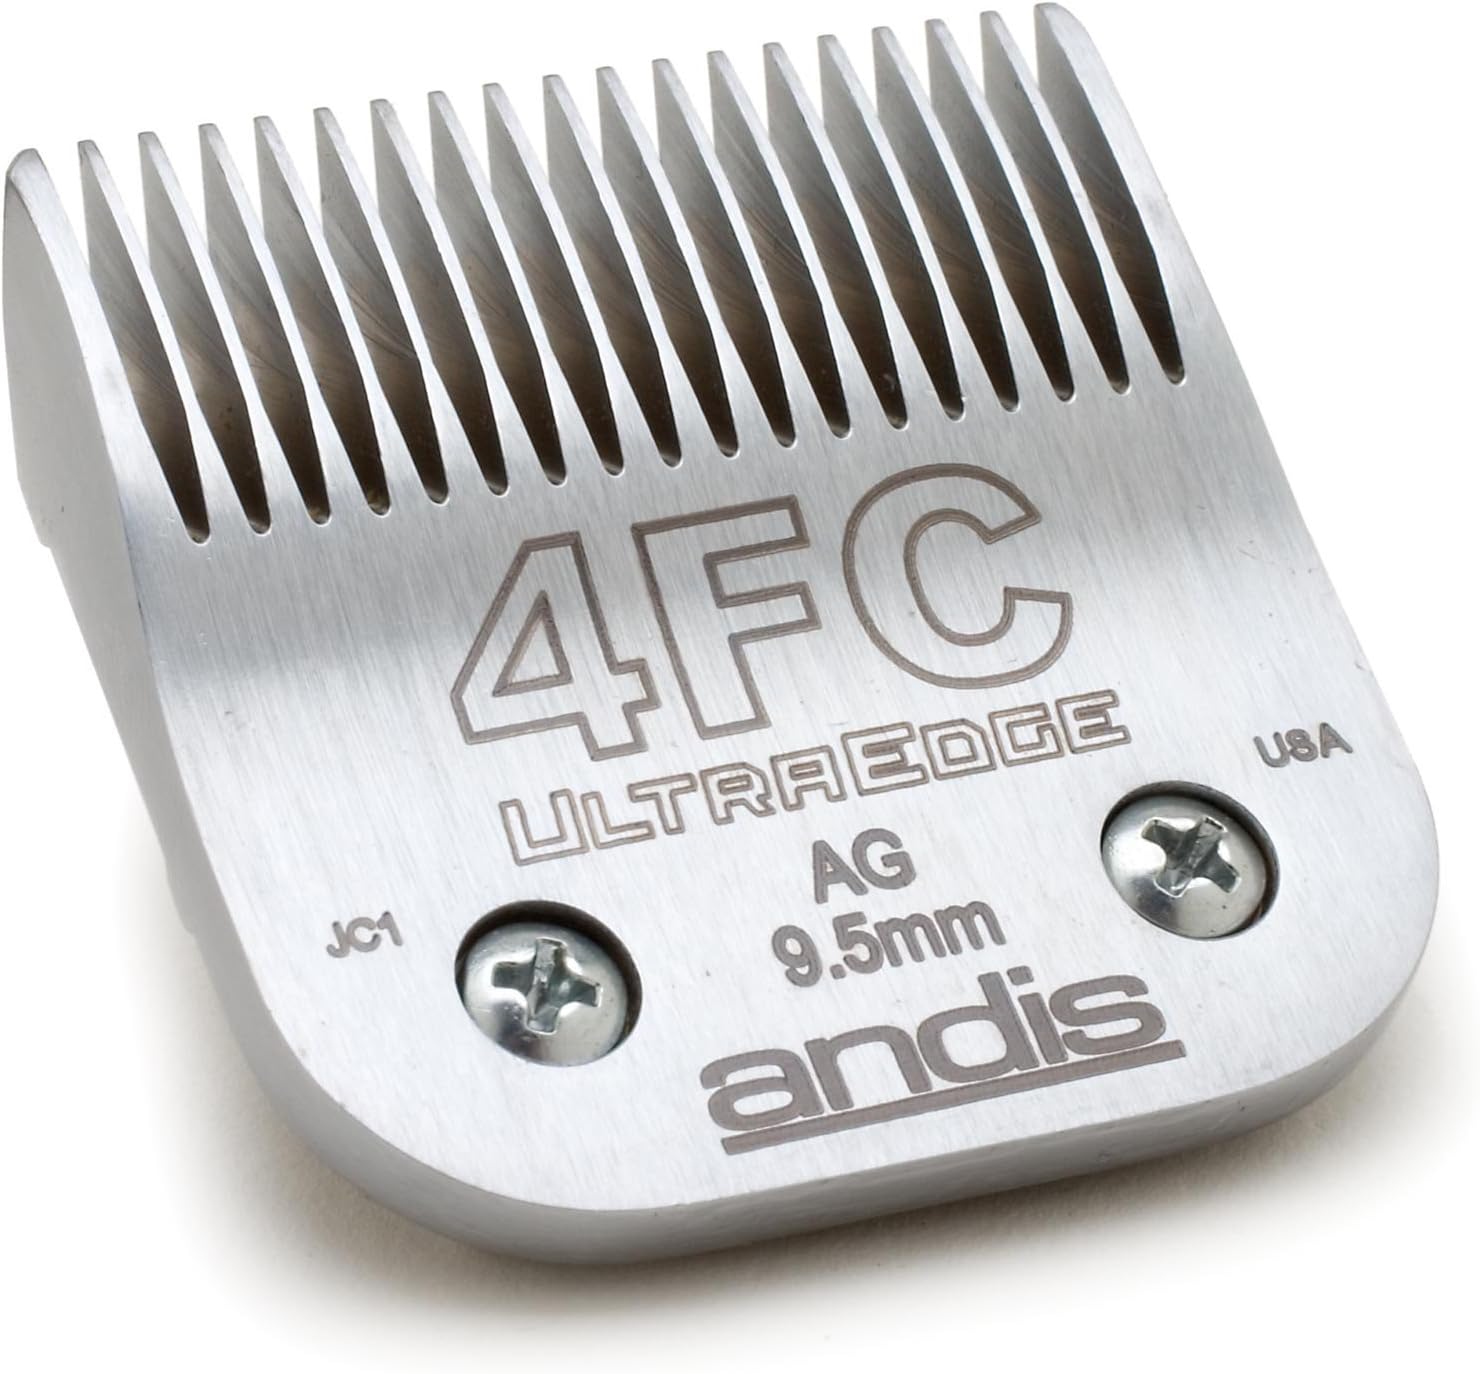 Hair Clippers And Trimmers : Andis – 64123, Ultra Edge Detachable Dog Clipper Blade – Carbon-Infused Steel, Long-Lasting Sharp Edges with Deep Teeth, Removes Hair 3/8-Inch (9.5 mm) - Fits AG, AGC, BDC Models - Size-4 FC, Chrome